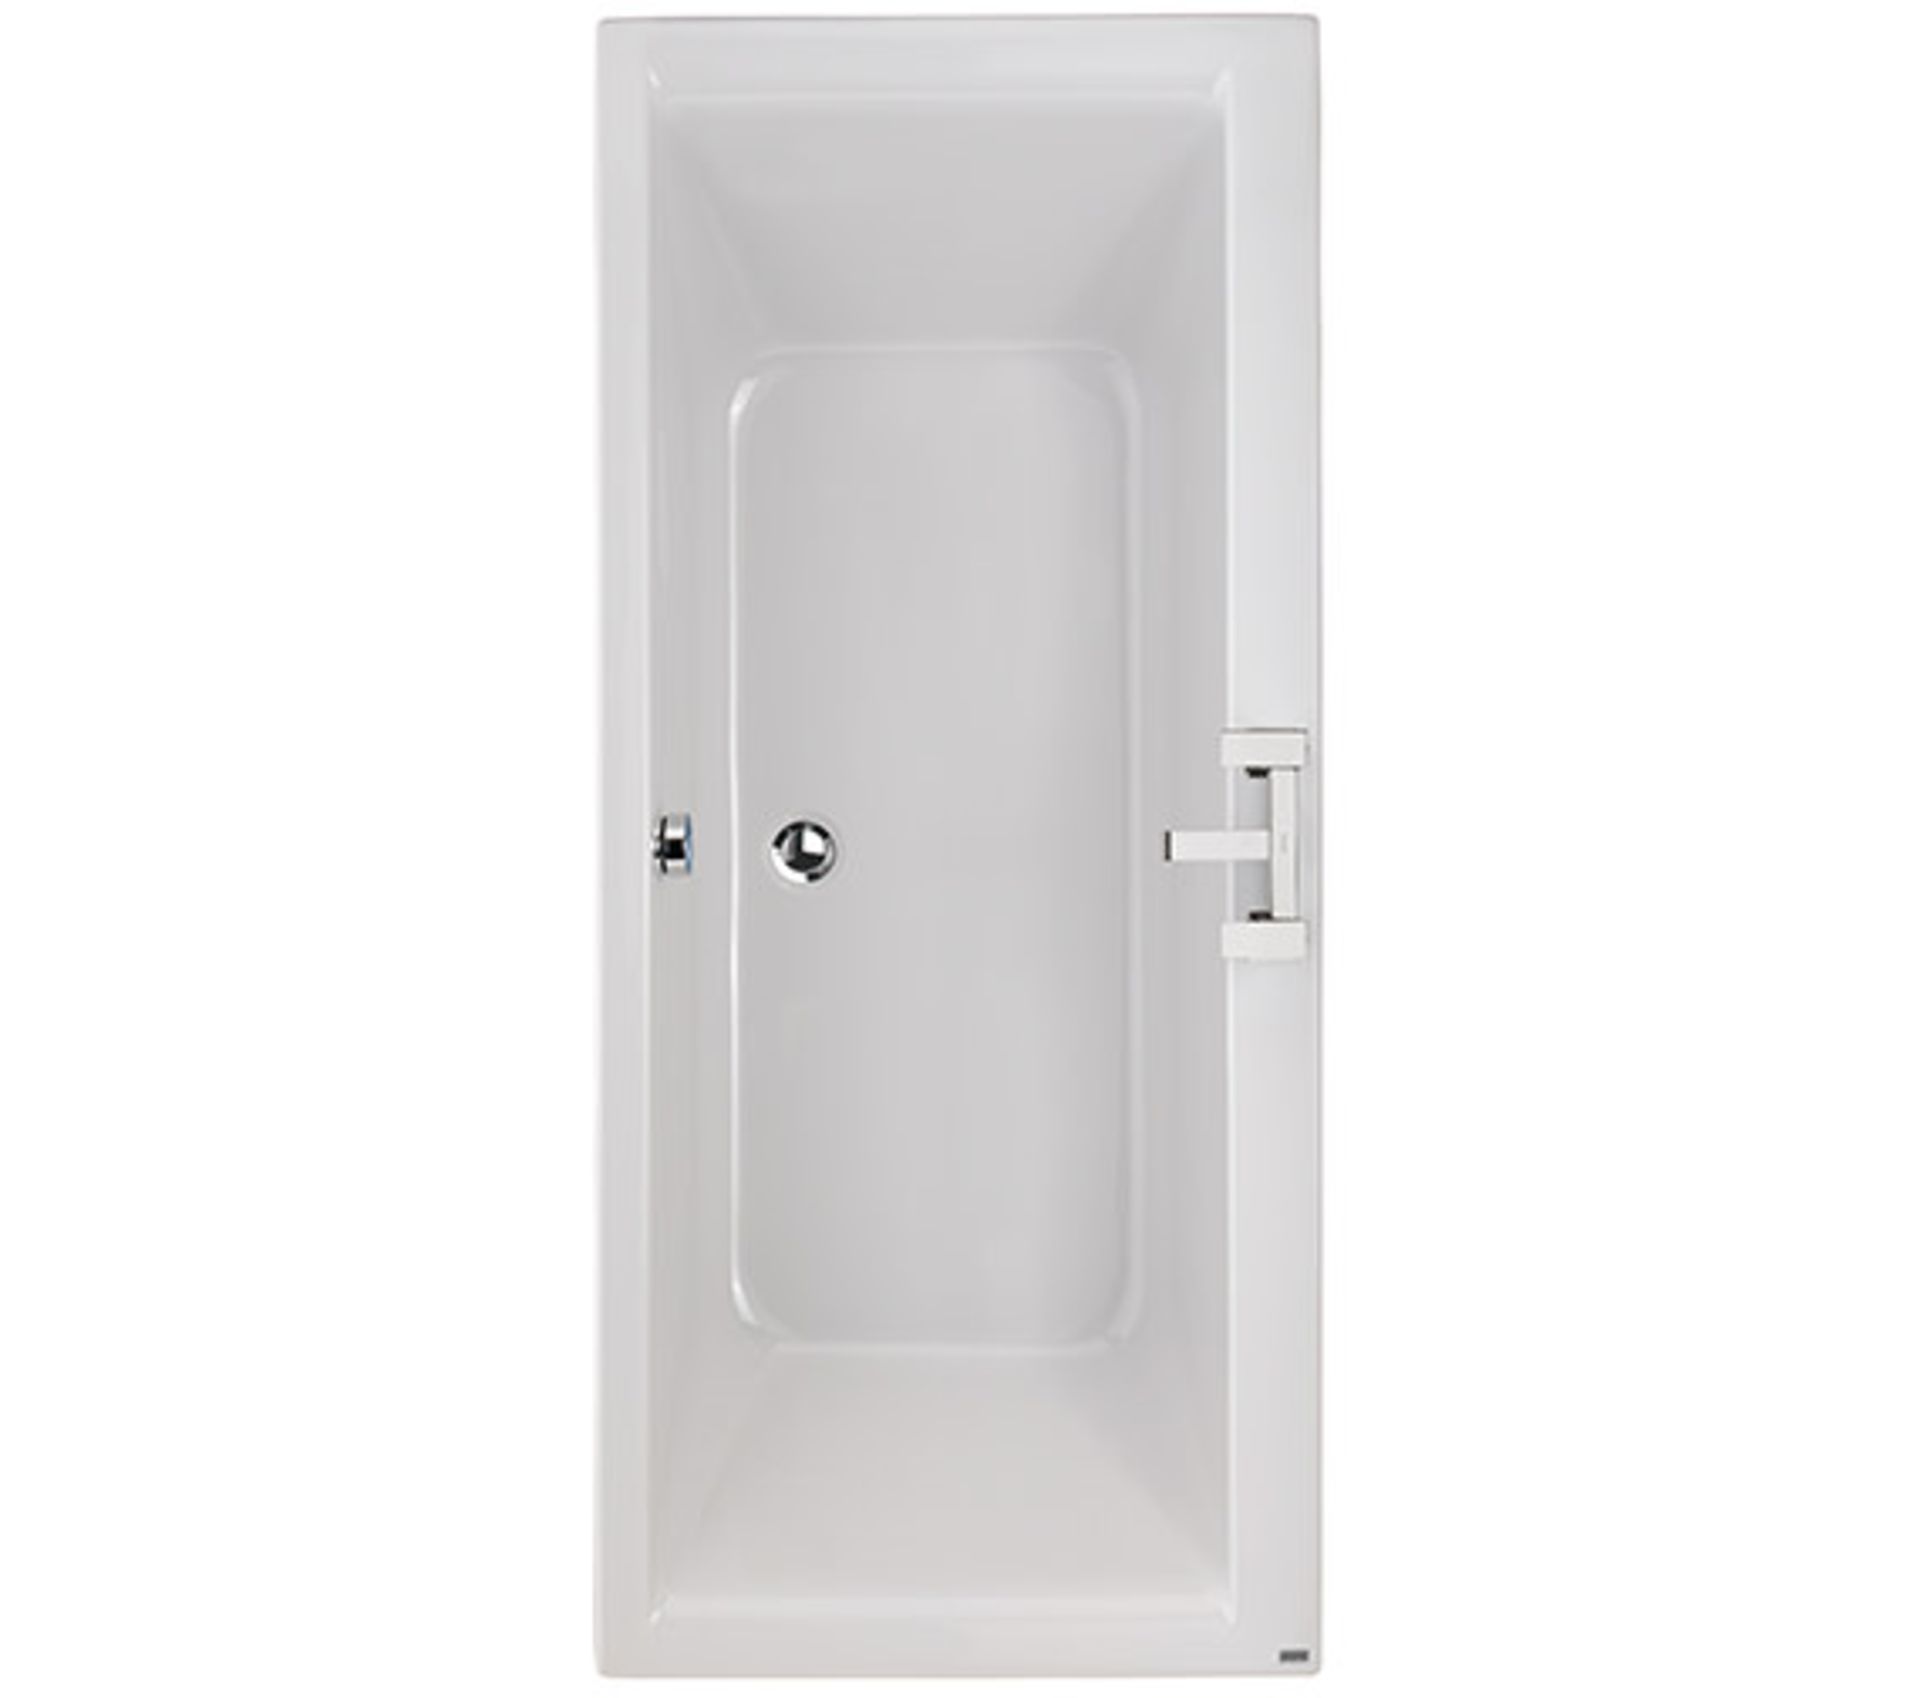 (RC50) 1700x750mm Twyfords Clarissa Plus Double Ended White Bath Tub. RRP £442.99. The Twyford... - Image 2 of 4